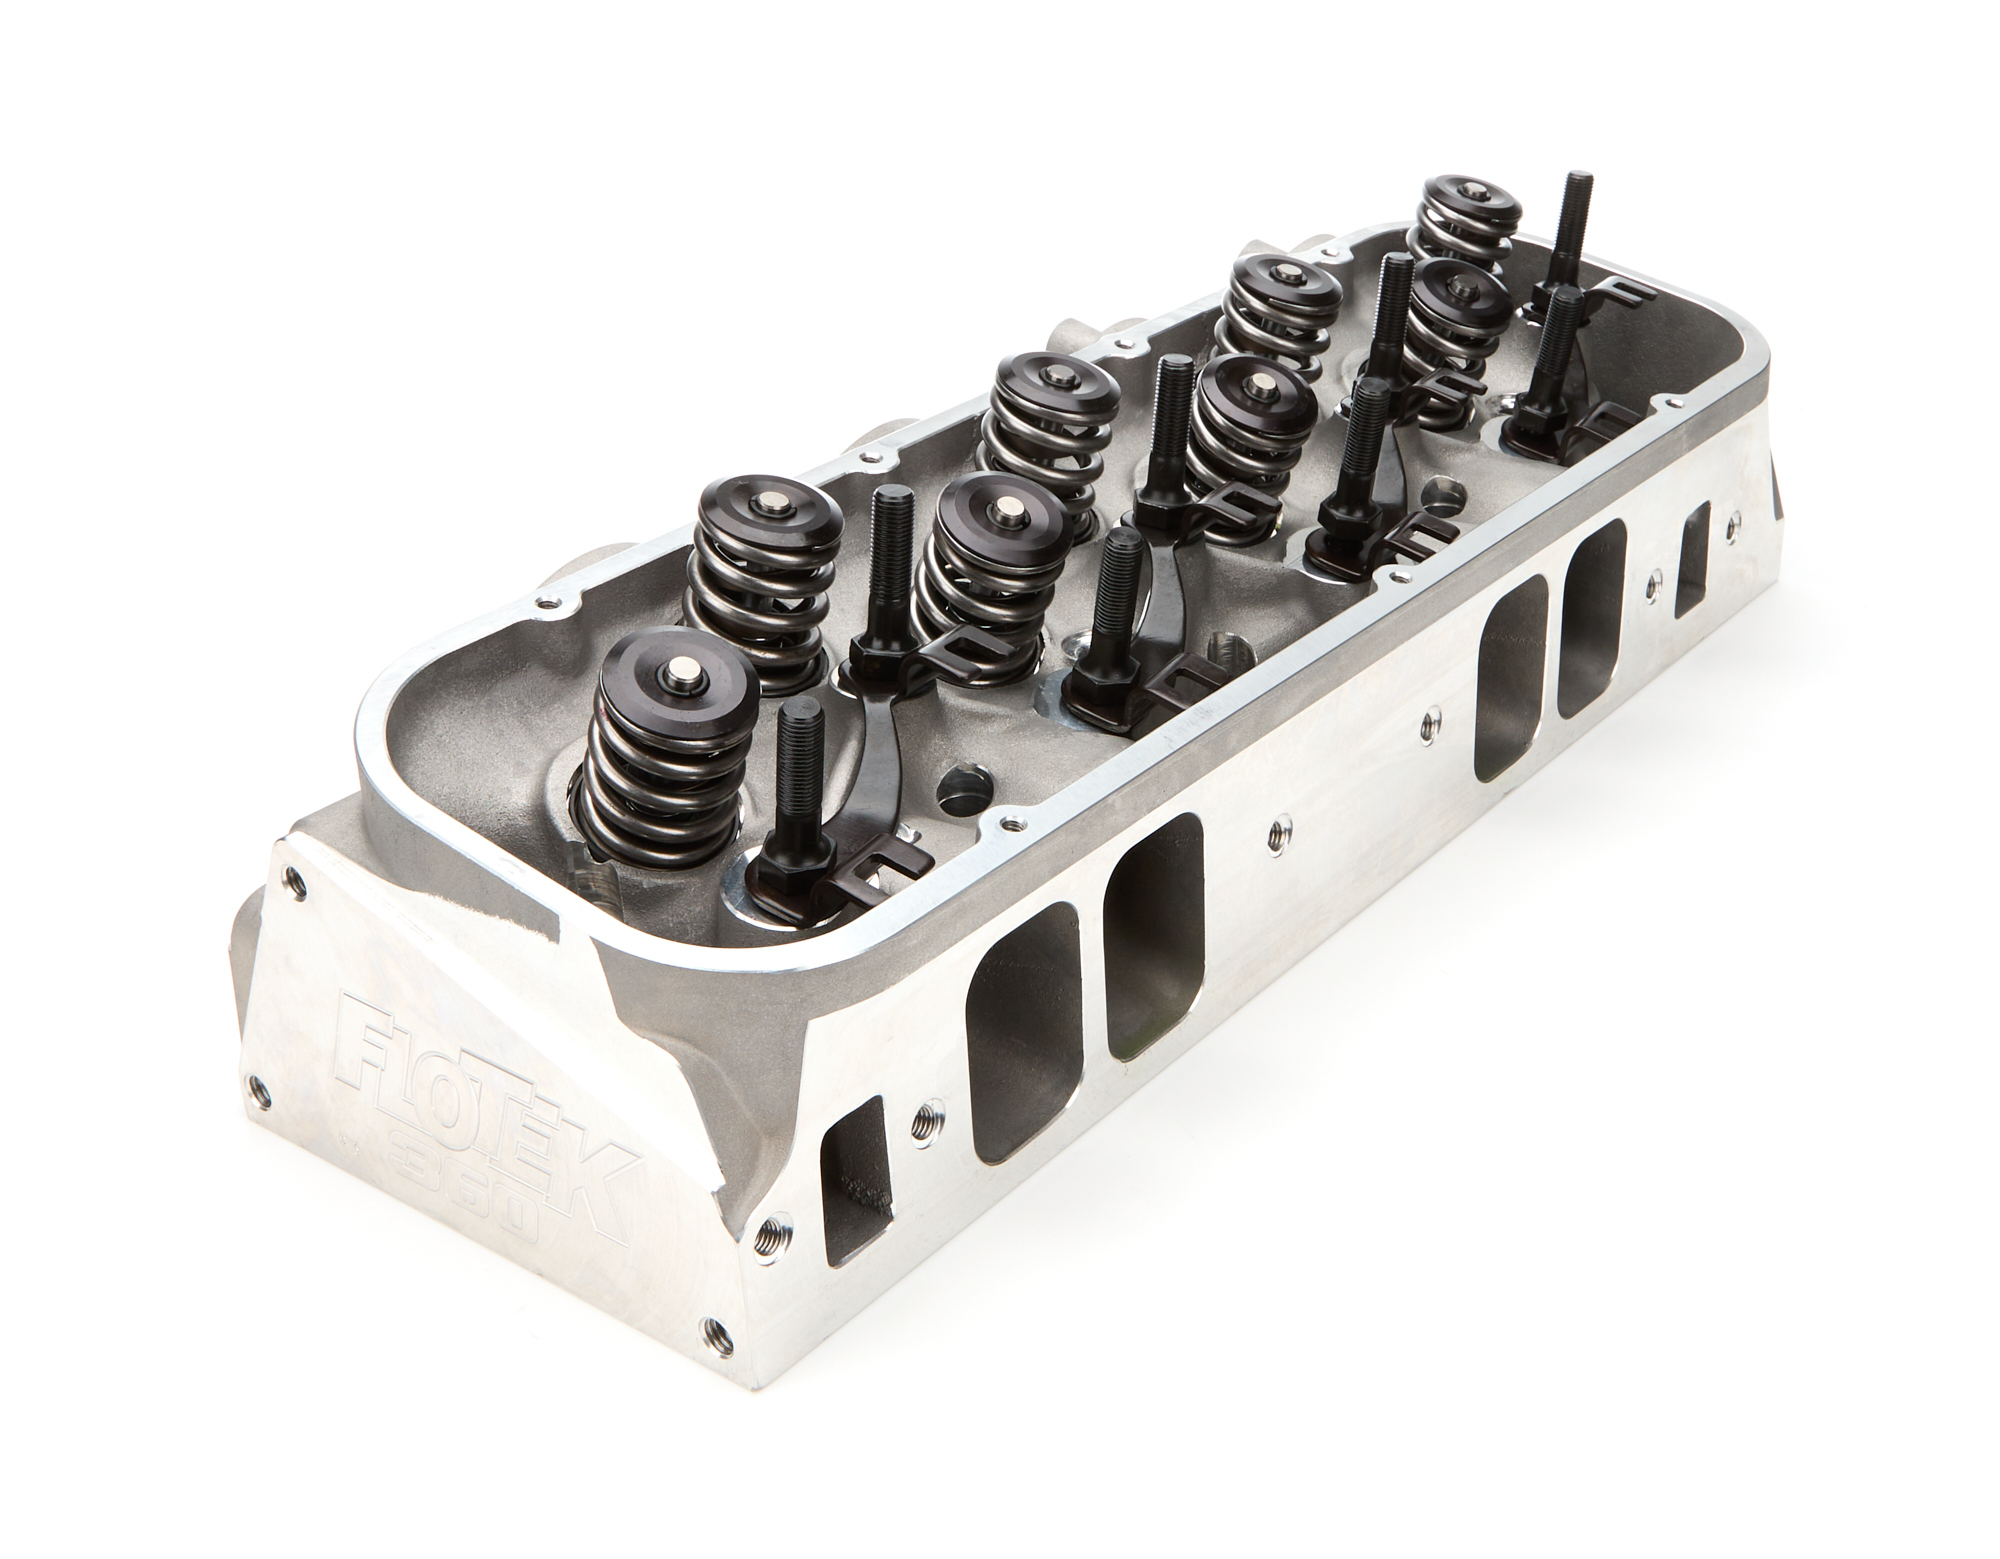 Flo Tek 360-600 Cylinder Head, Assembled, 2.540 in/1.880 in Valves, 360 cc Intake, 121 cc Chamber, 1.530 in Springs, Aluminum, Big Block Chevy, Each